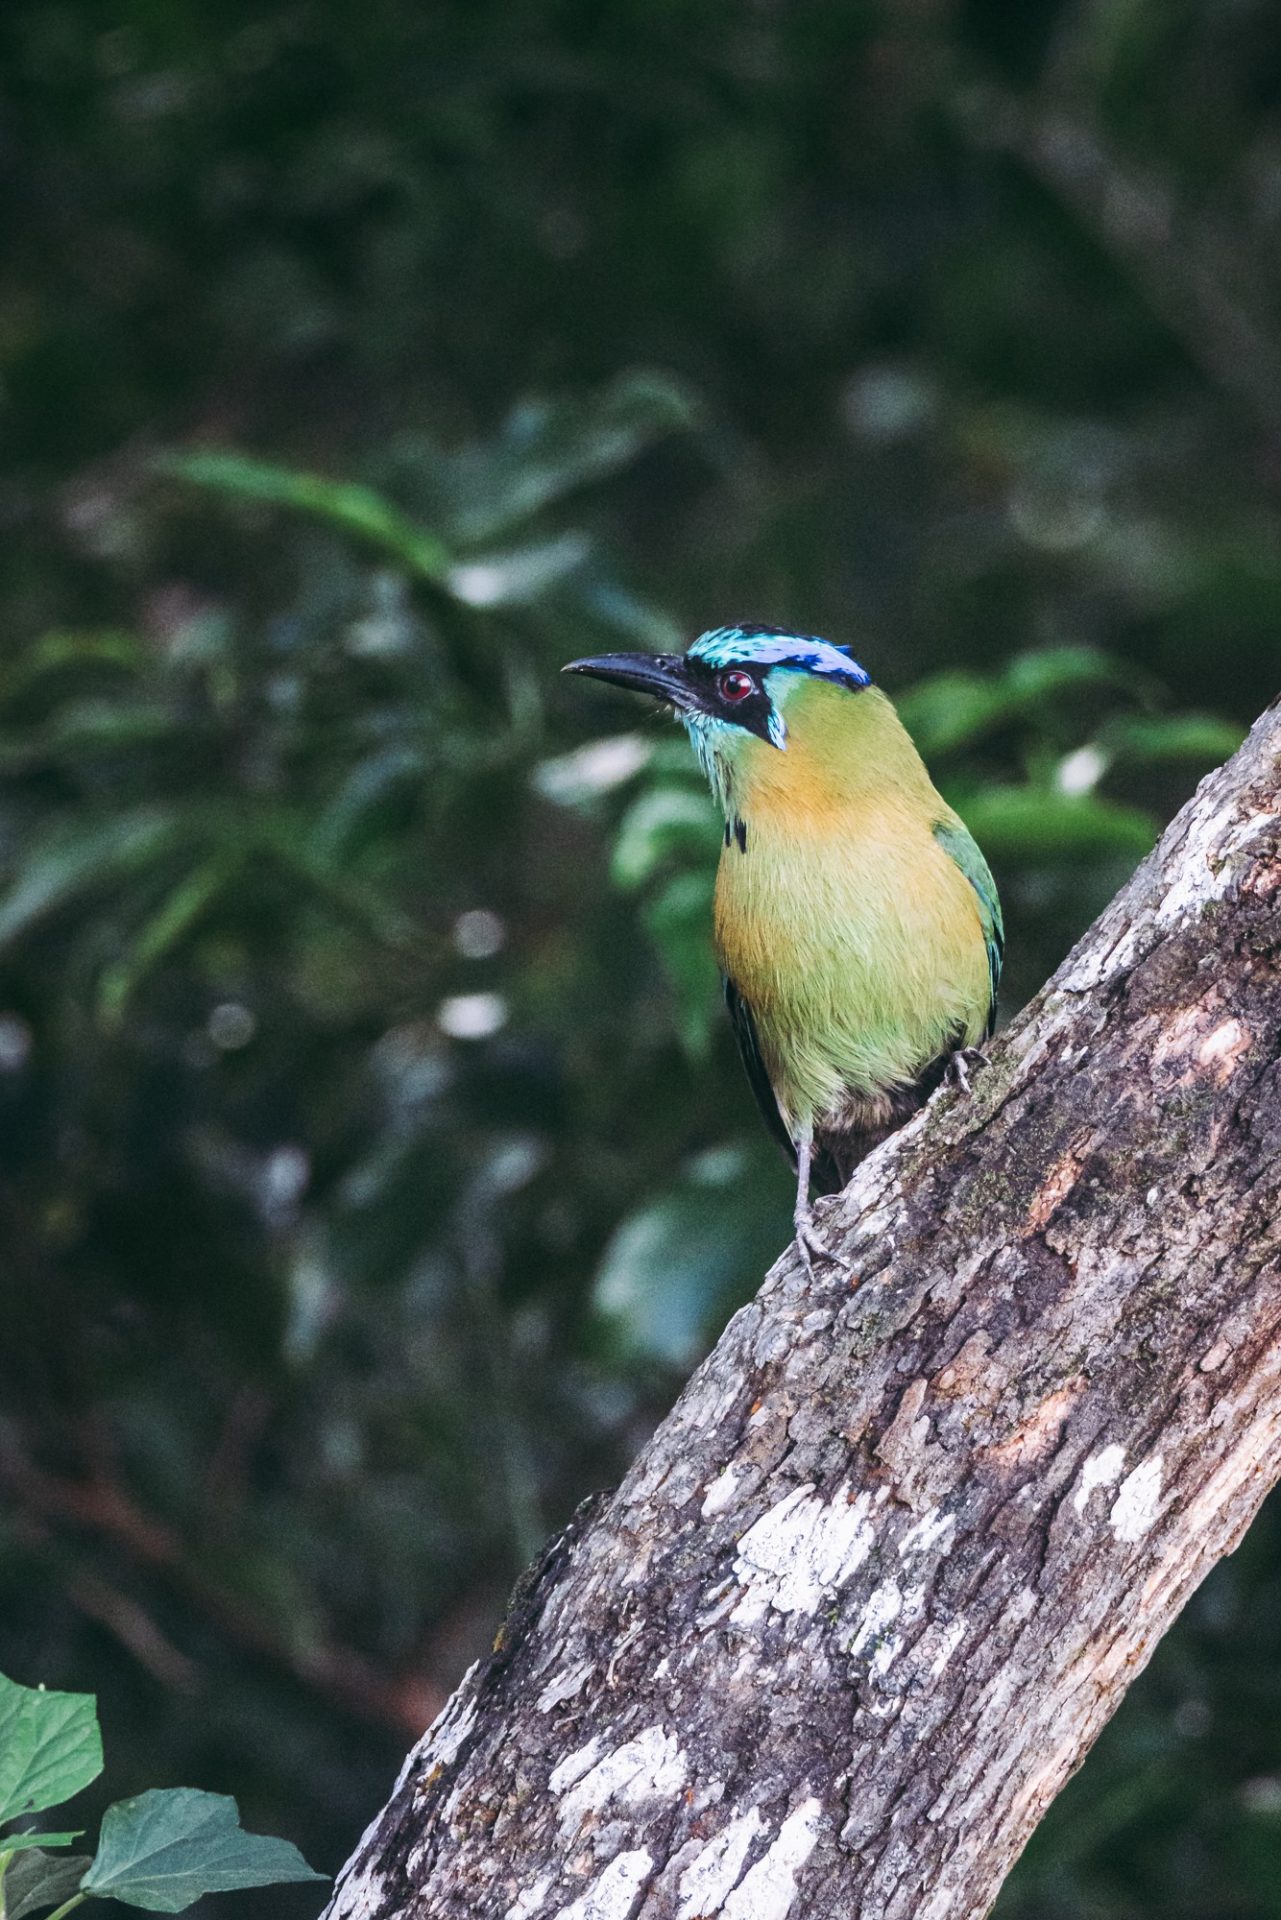 More bird species can be found in Monteverde Cloud Forest